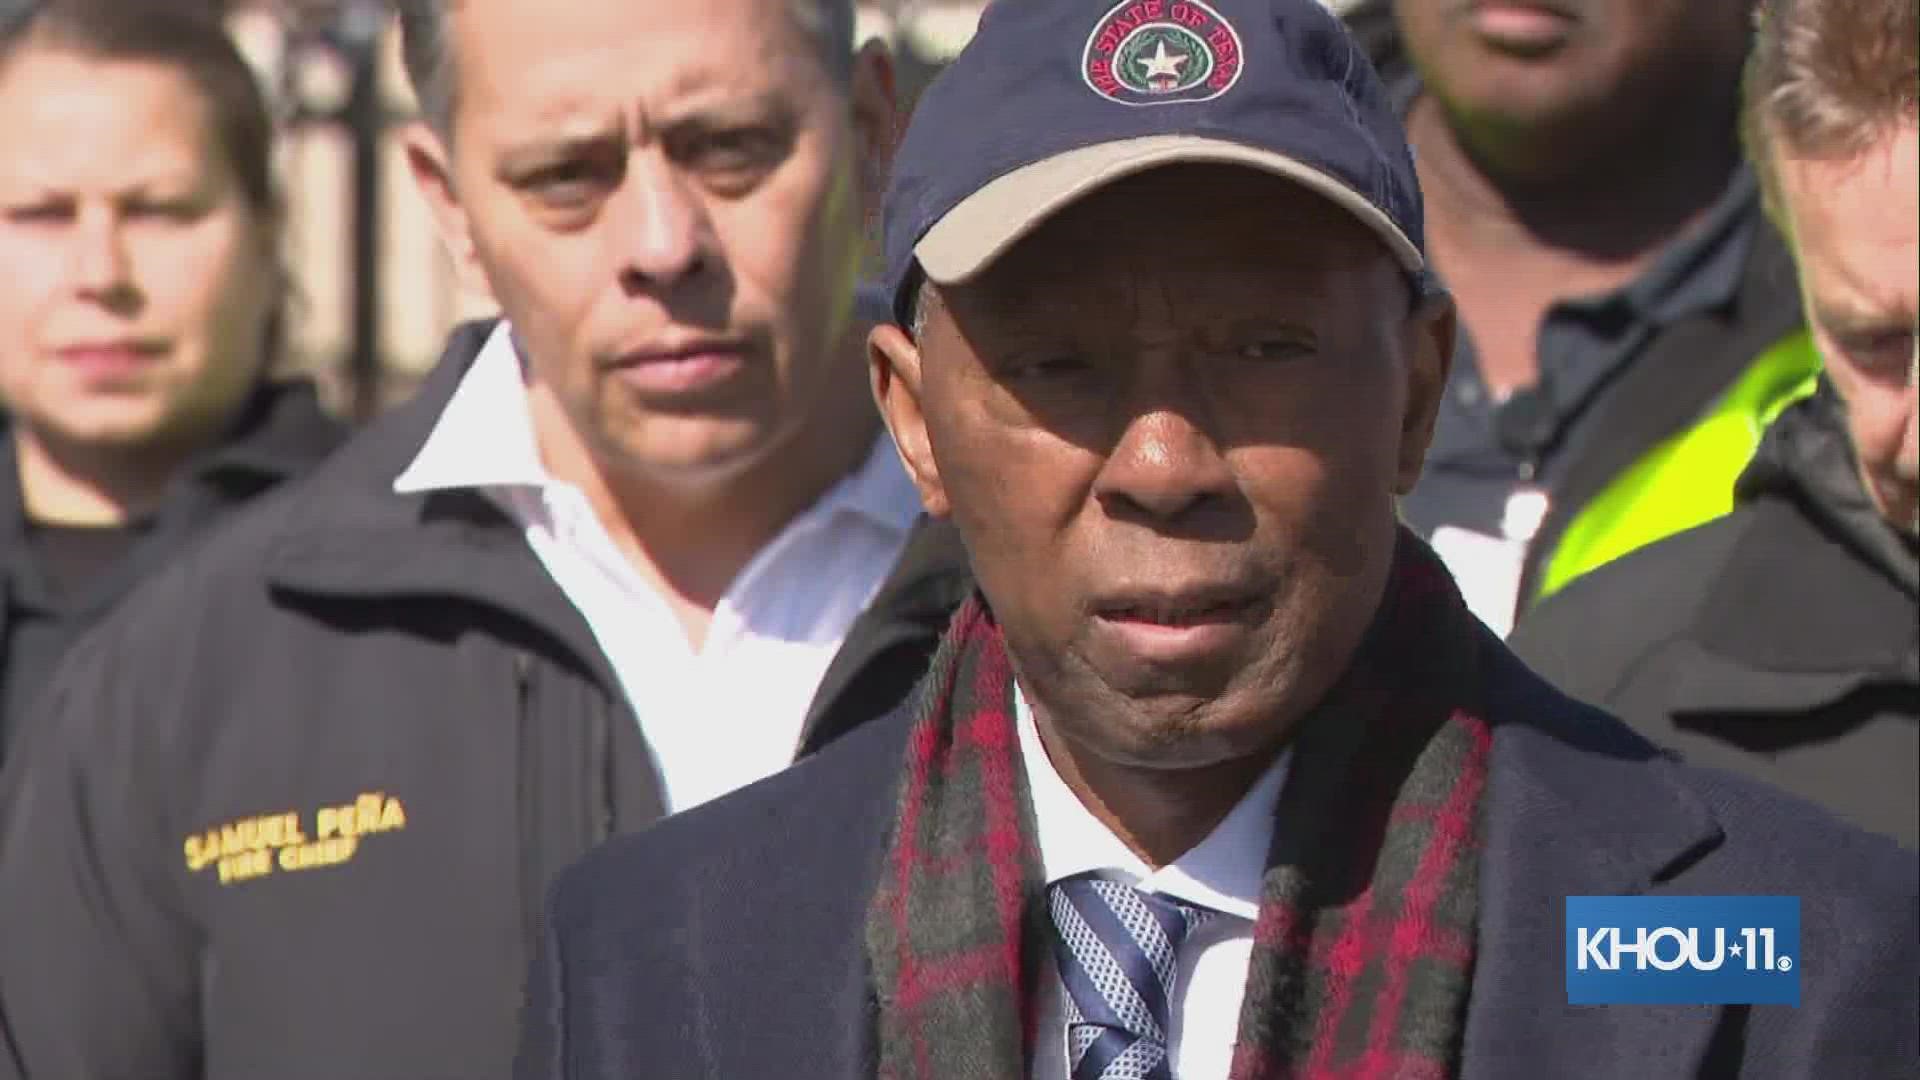 The mayor said the White House has already reached out and FEMA representatives have been in touch. "We are here for you. We know these are tough times," he said.